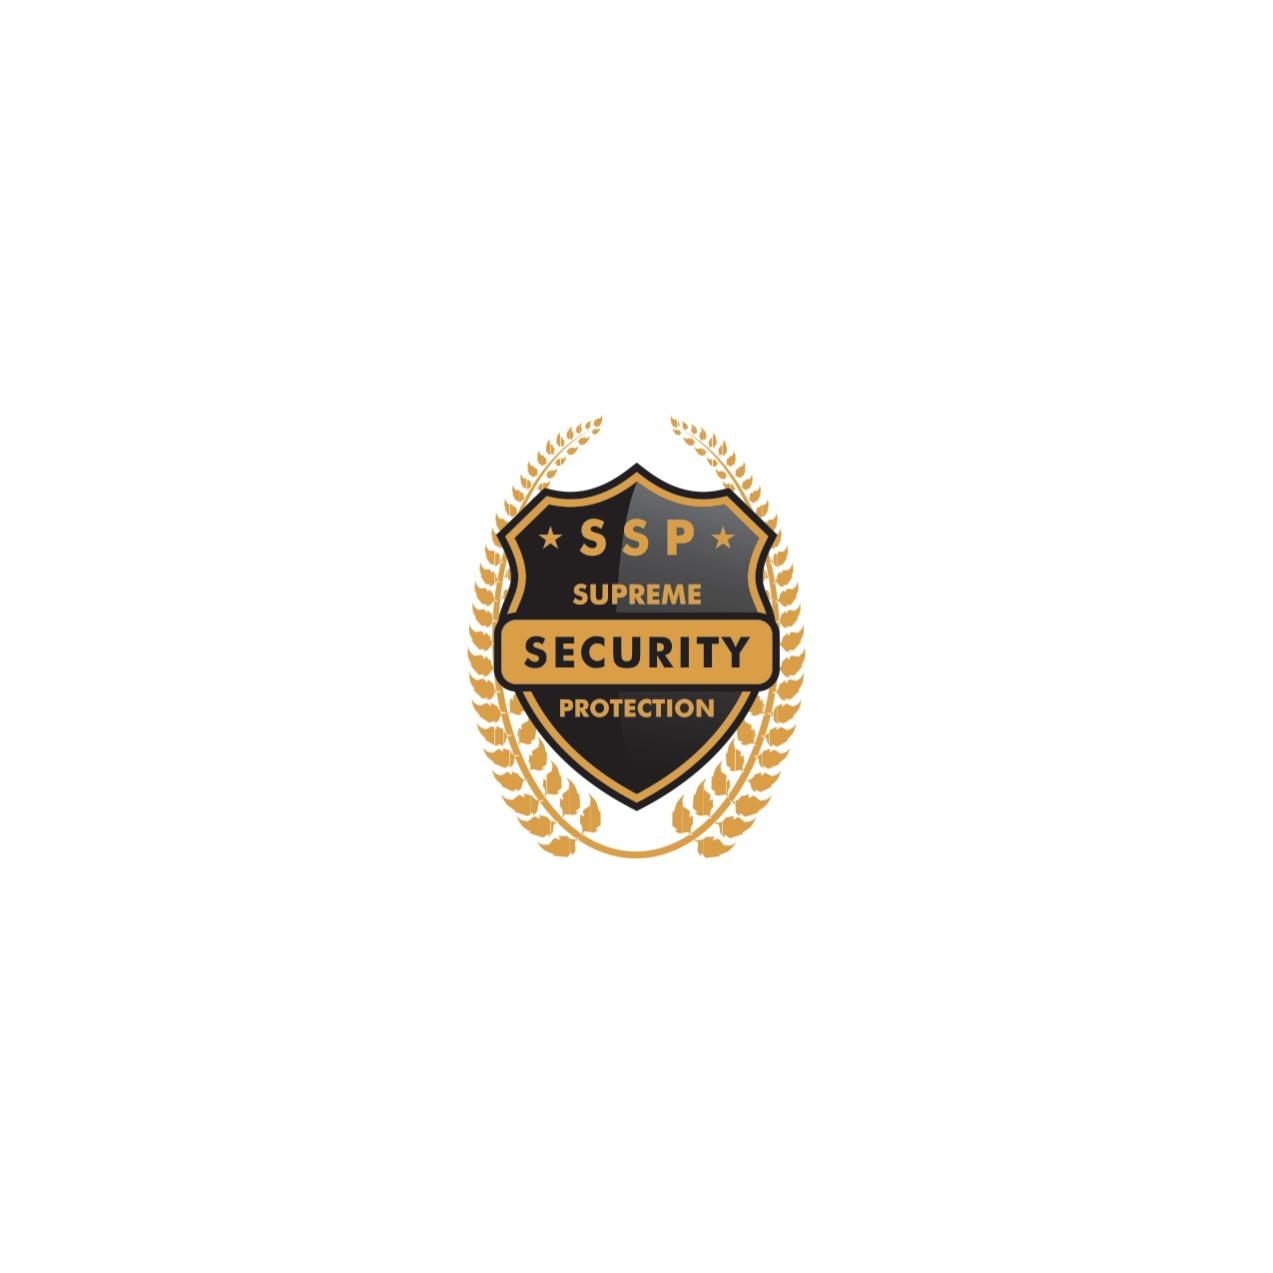 Supreme Security Protection Melbourne